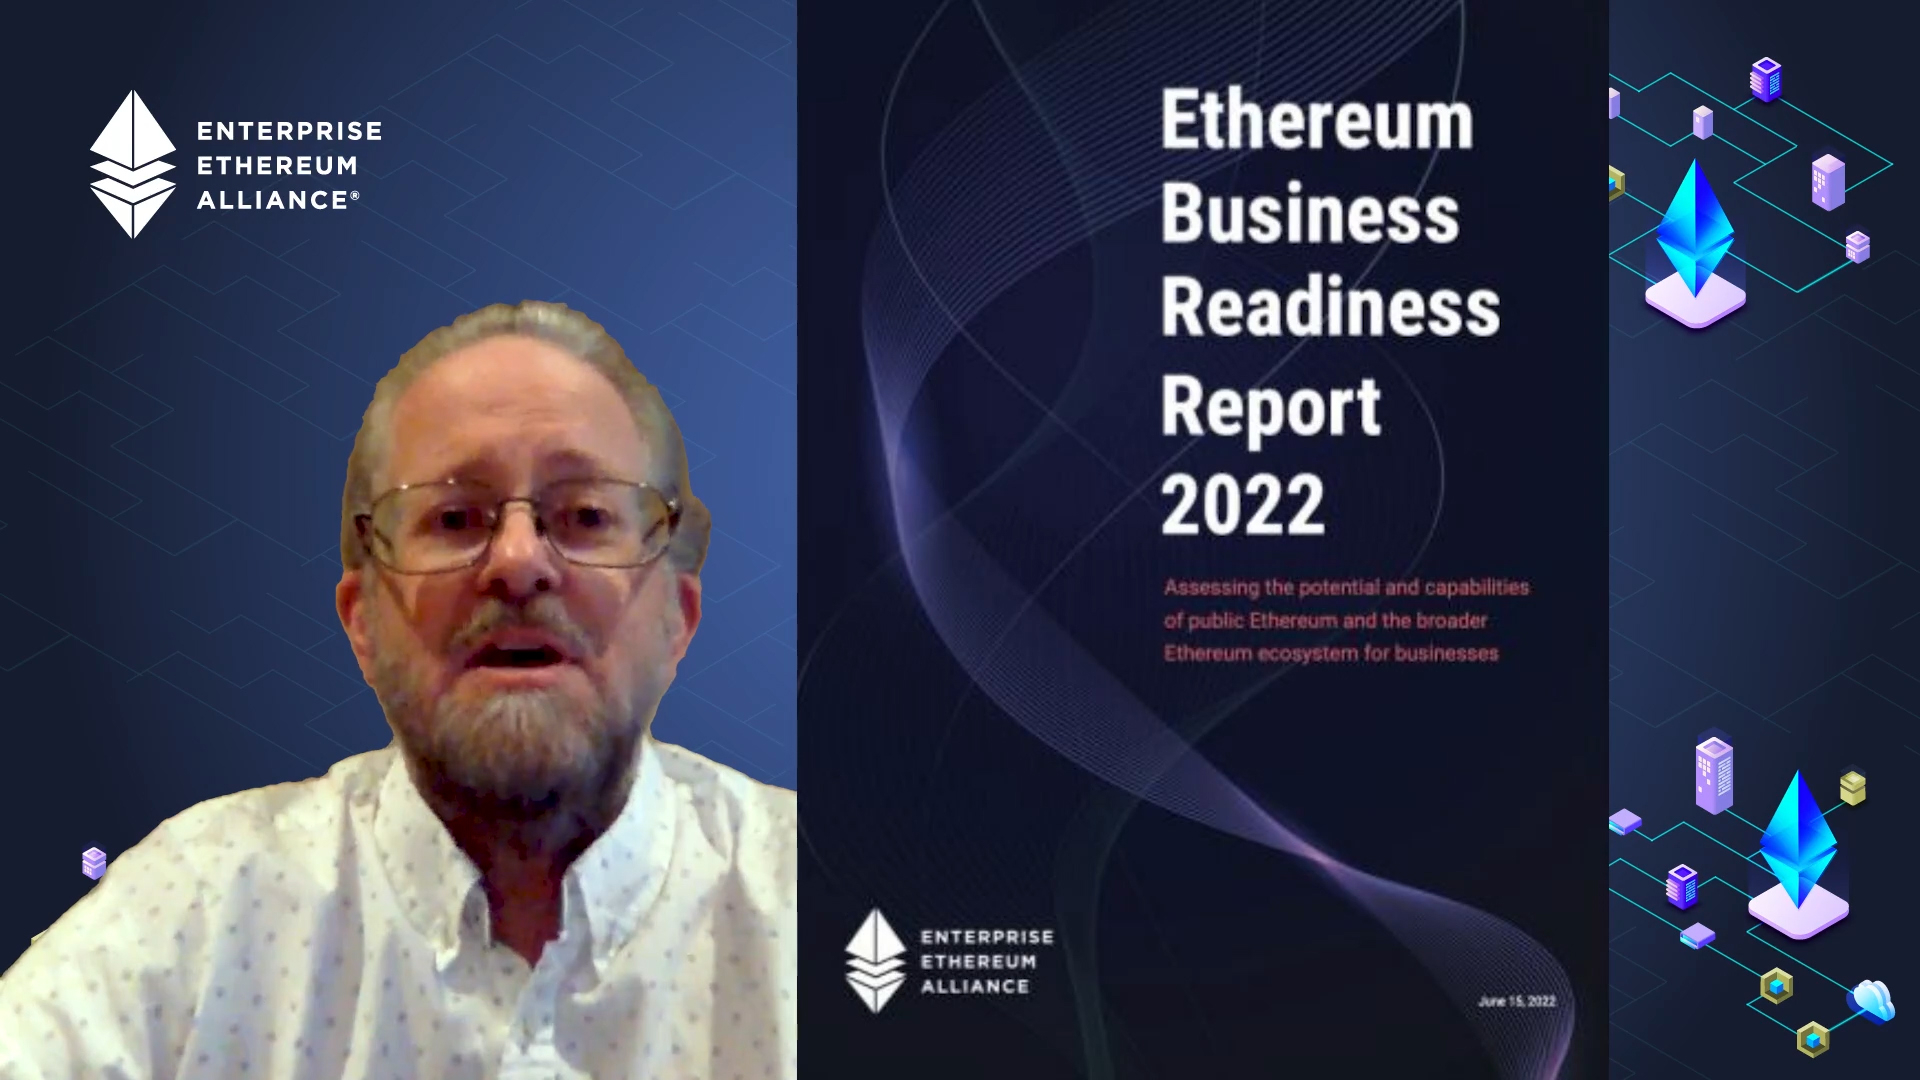 Hear from EEA Executive Director Dan Burnett on the report’s findings and Ethereum’s business potential.